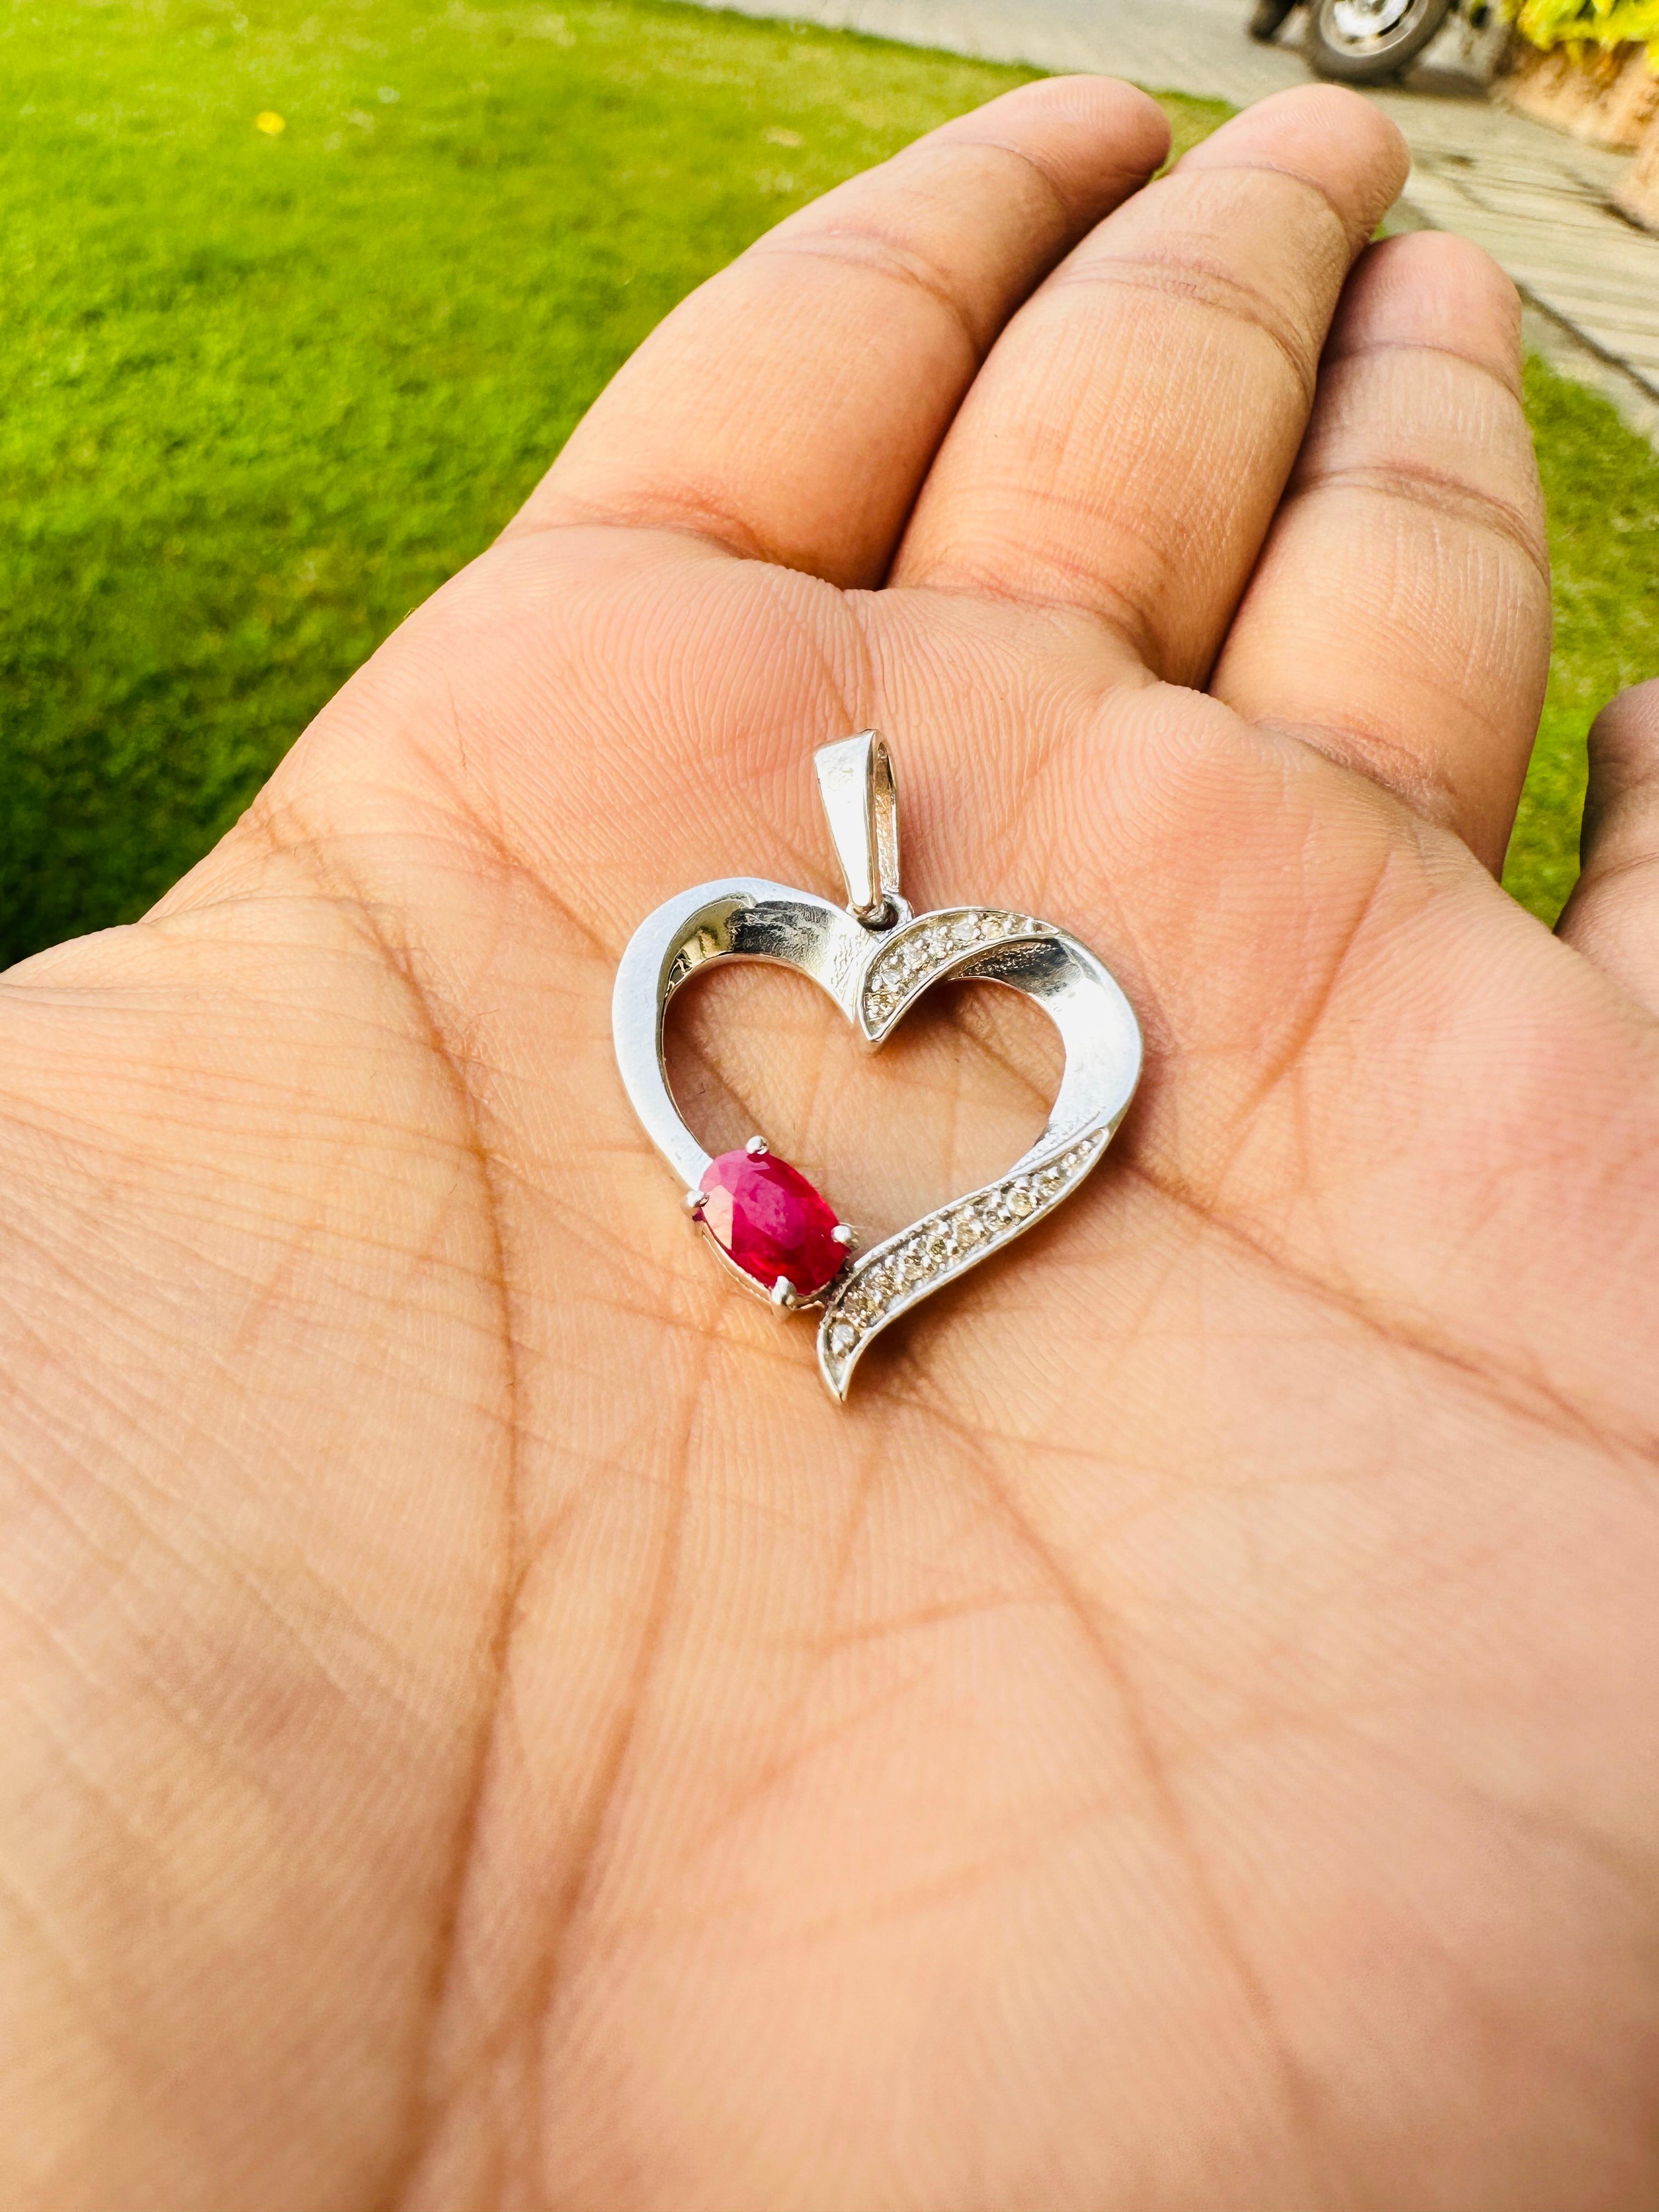 This Ruby and Diamond Heart Love Pendant Gift for Valentine is meticulously crafted from the finest materials and adorned with stunning ruby which enhances confidence, leadership qualities and attract career opportunities.
This delicate to statement